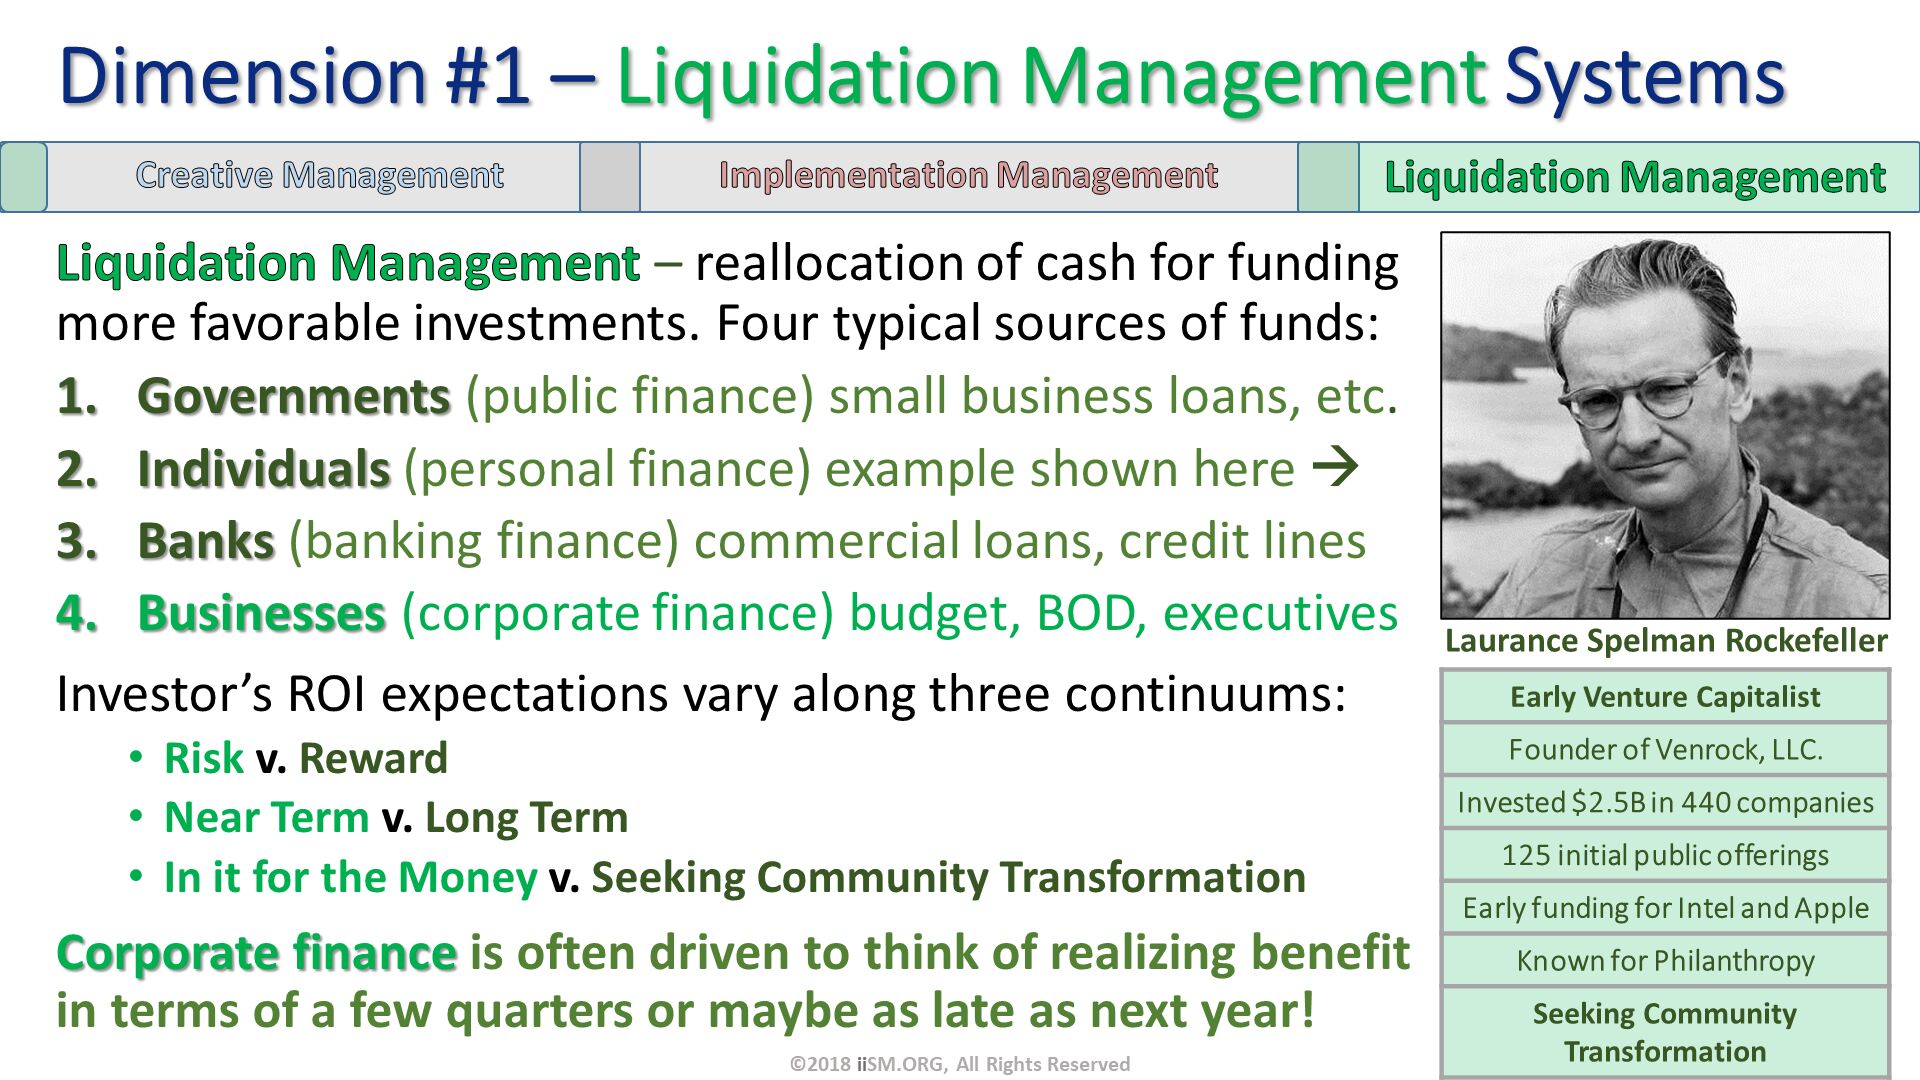 Liquidation Management – reallocation of cash for funding more favorable investments. Four typical sources of funds:
Governments (public finance) small business loans, etc. 
Individuals (personal finance) example shown here  
Banks (banking finance) commercial loans, credit lines
Businesses (corporate finance) budget, BOD, executives
Investor’s ROI expectations vary along three continuums:
Risk v. Reward       
Near Term v. Long Term 
In it for the Money v. Seeking Community Transformation
Corporate finance is often driven to think of realizing benefit in terms of a few quarters or maybe as late as next year!. Dimension #1 – Liquidation Management Systems. Laurance Spelman Rockefeller. ©2018 iiSM.ORG, All Rights Reserved. 